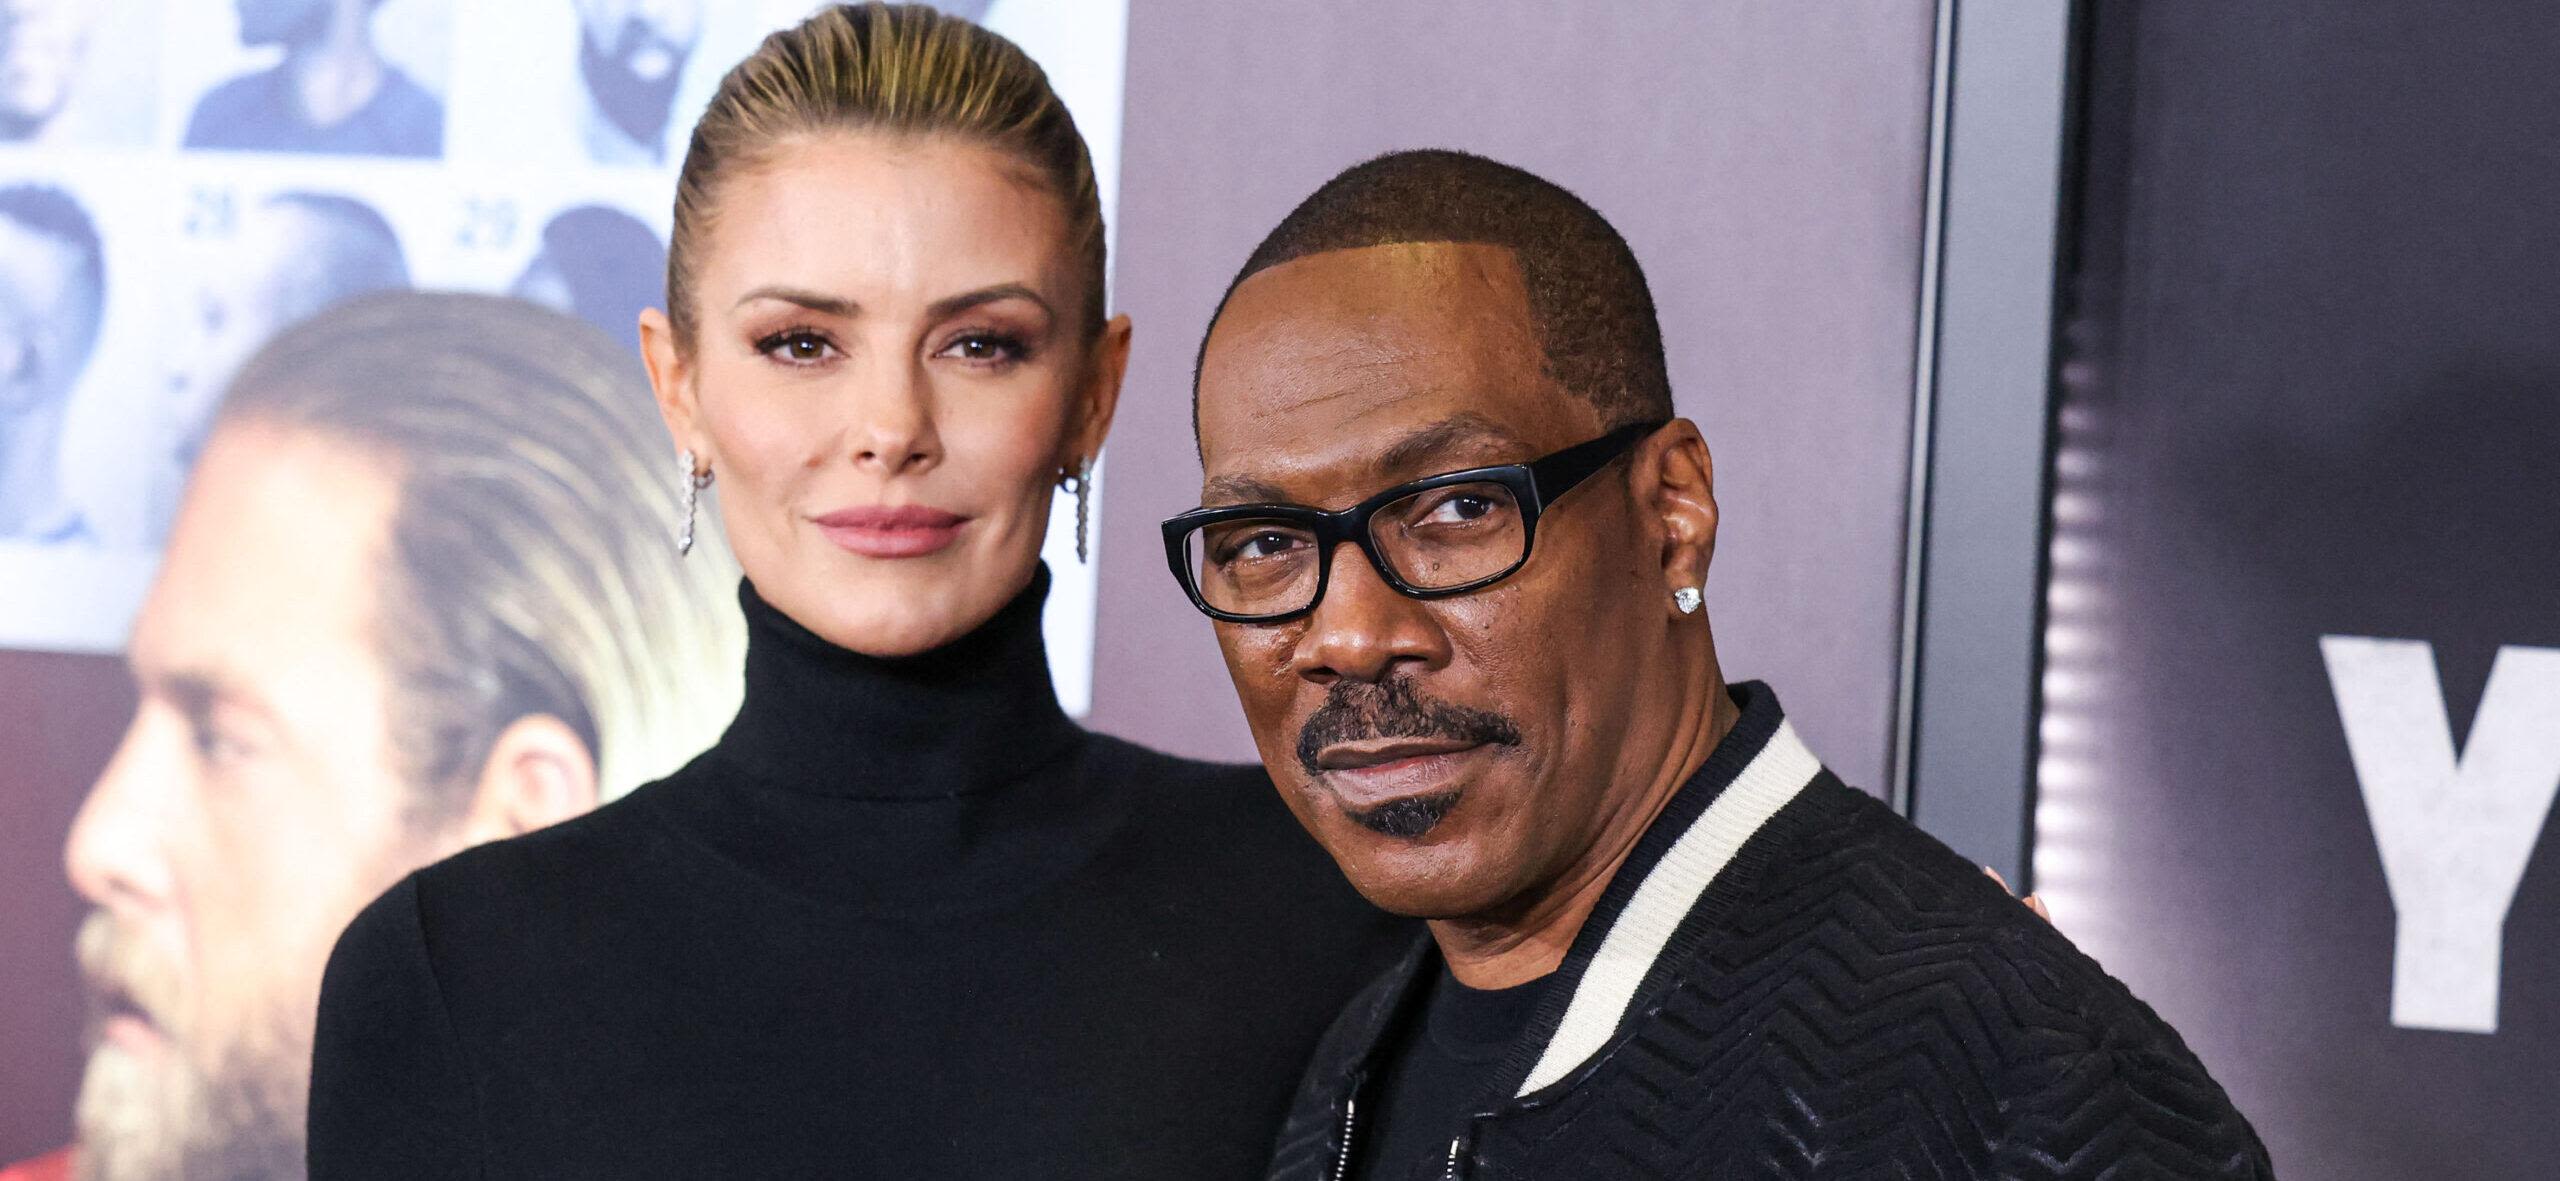 Eddie Murphy's Wife Paige Butcher Allegedly 'Calls The Shots' In Their Marriage: 'He Lets Her Rule'